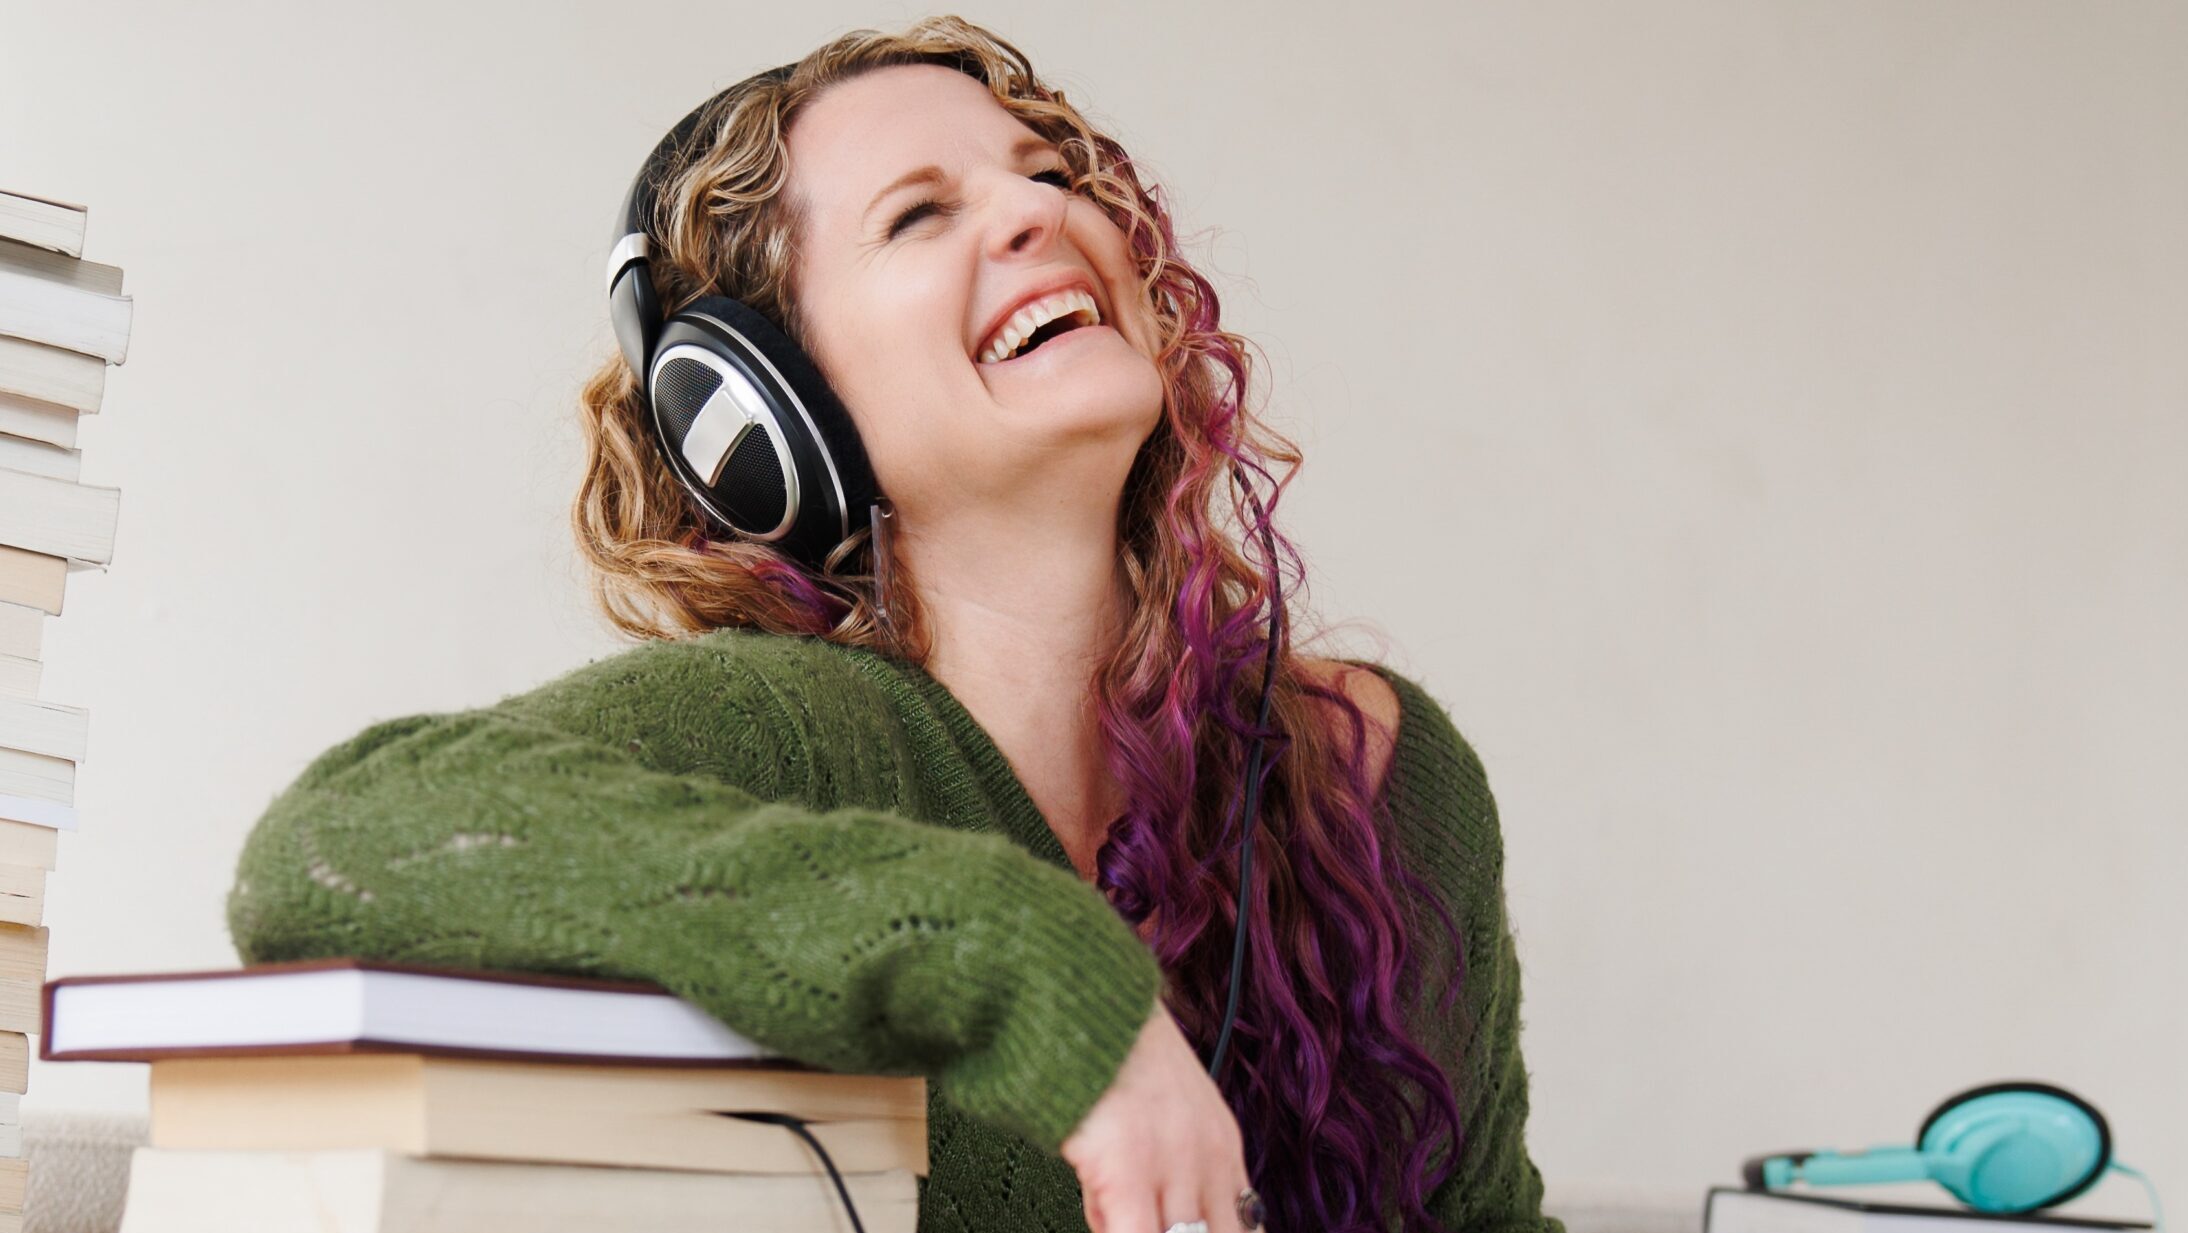 A woman with long curly hair and a green sweater sits among a pile of books listening to an audiobook